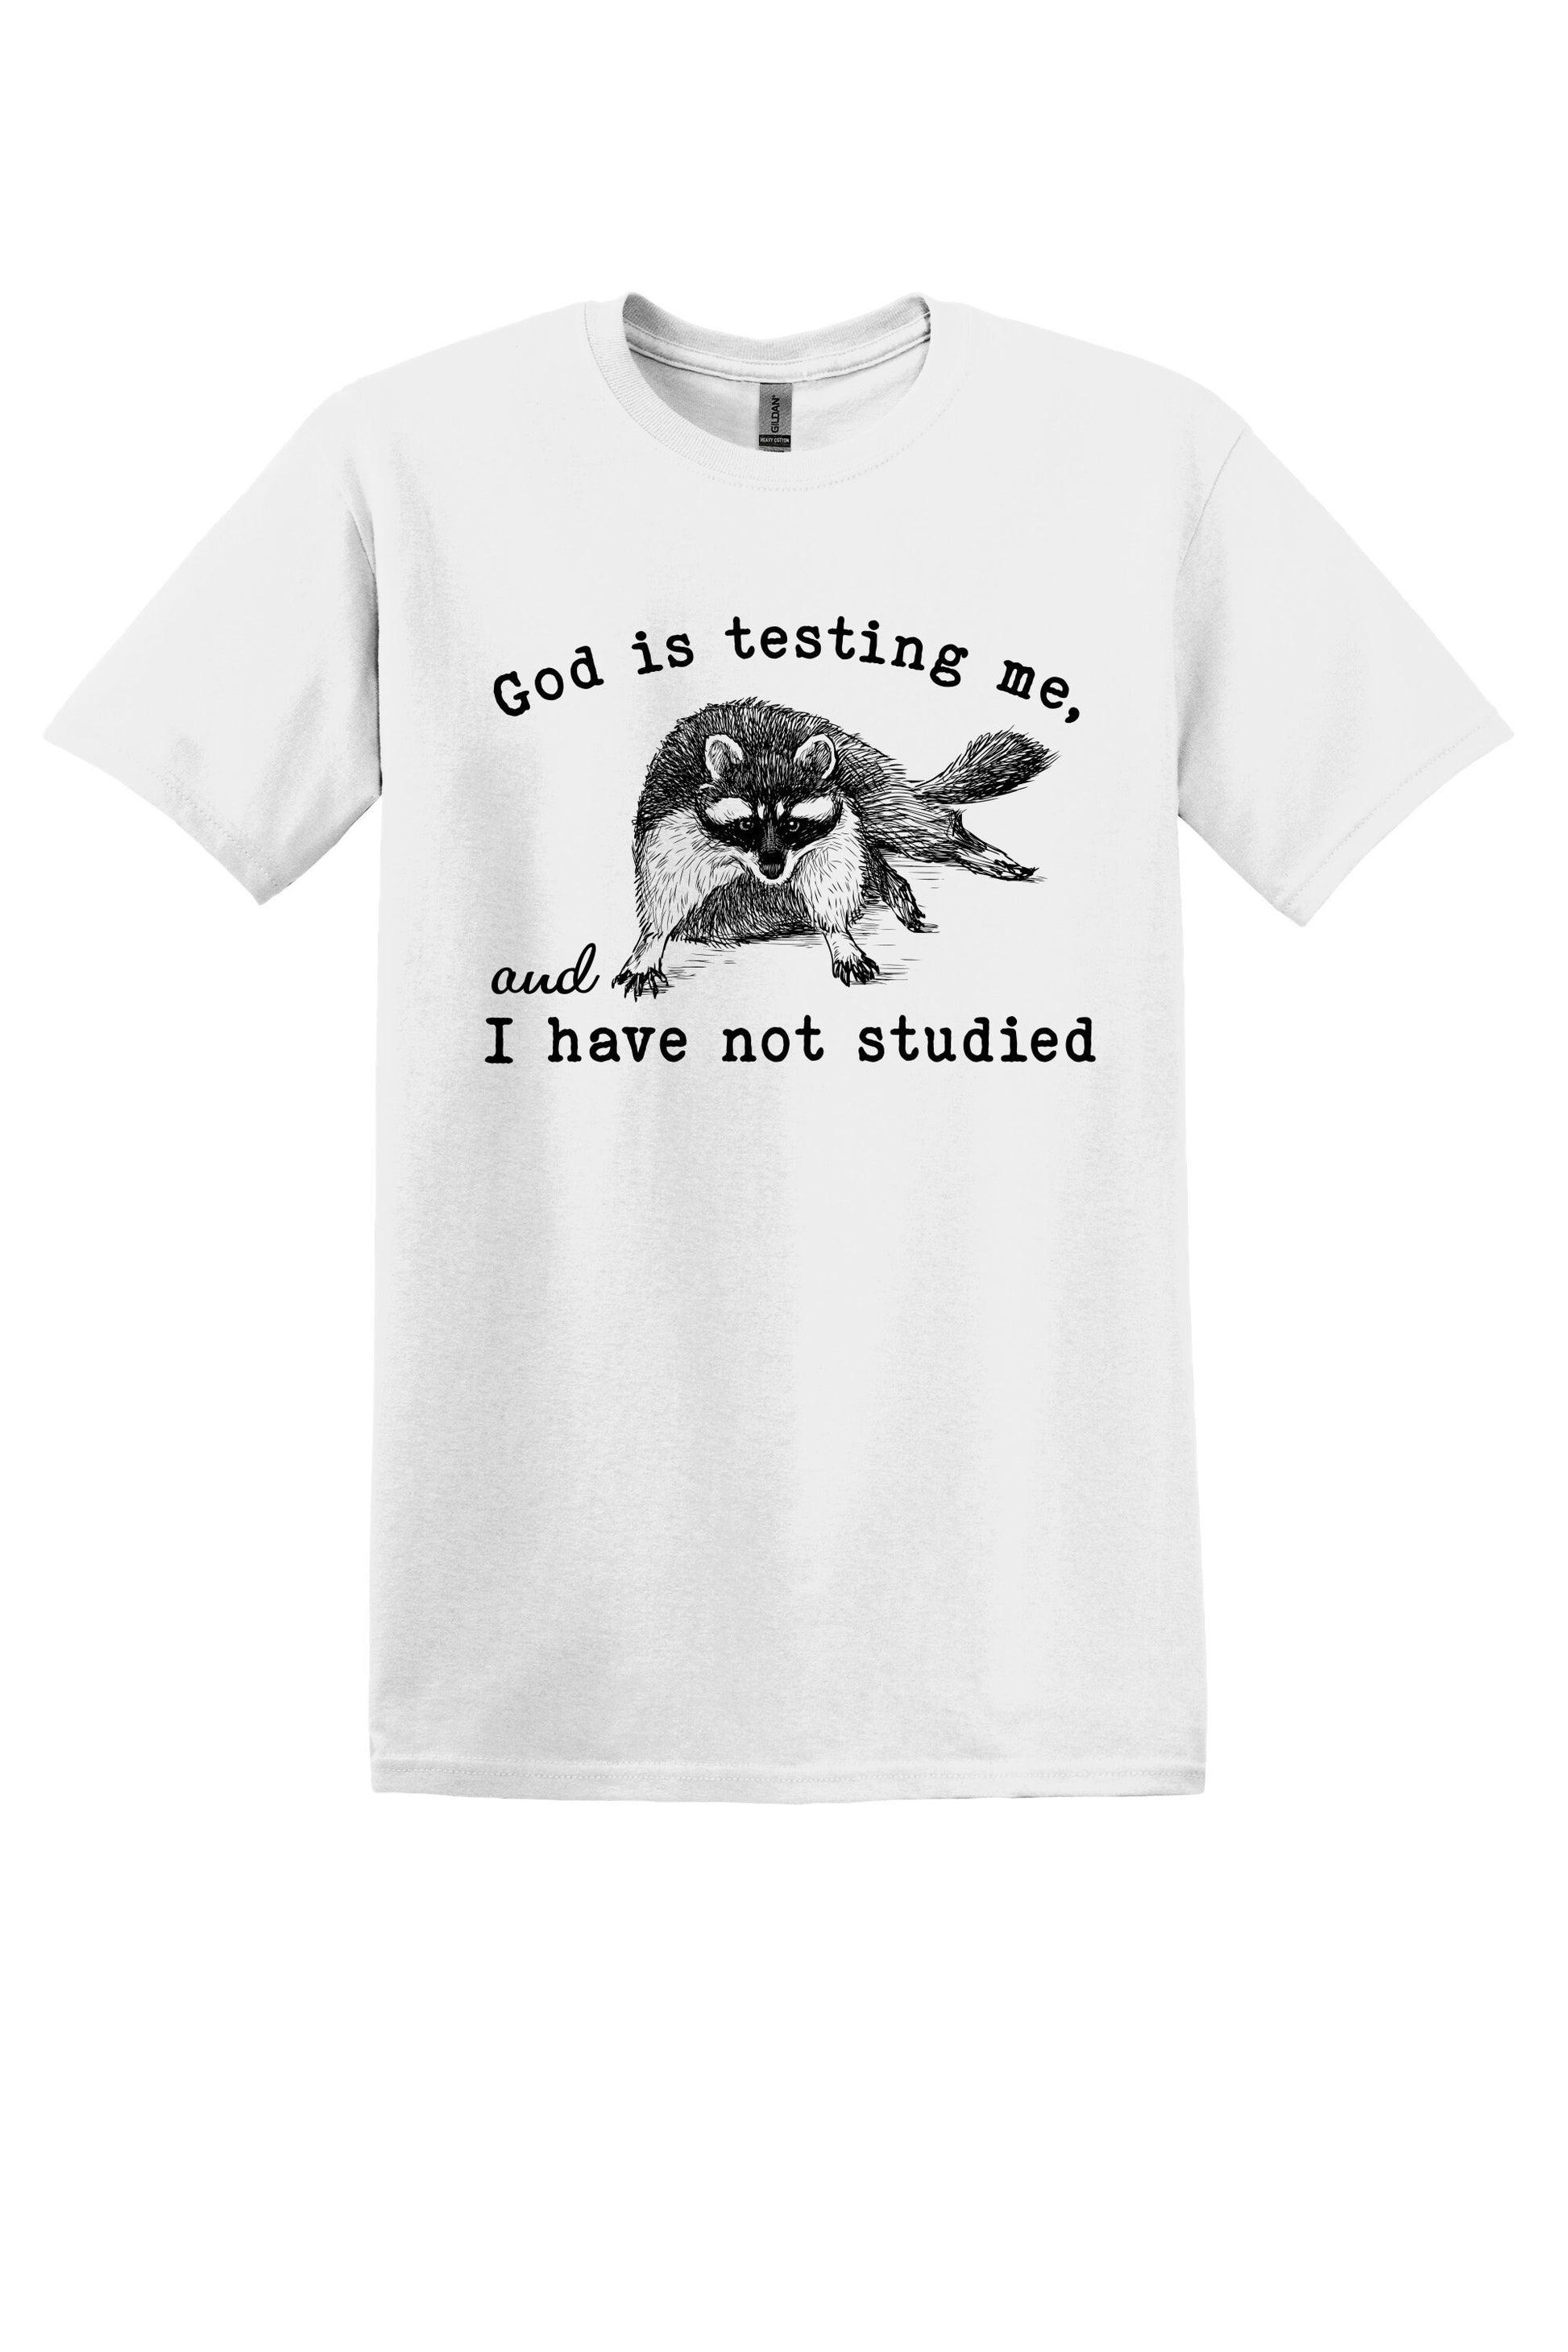 T-shirt Graphic Shirt Funny Adult TShirt Vintage Funny TShirt Nostalgia T-Shirt Relaxed Cotton Tee God is Testing Me and I Have Not Studied